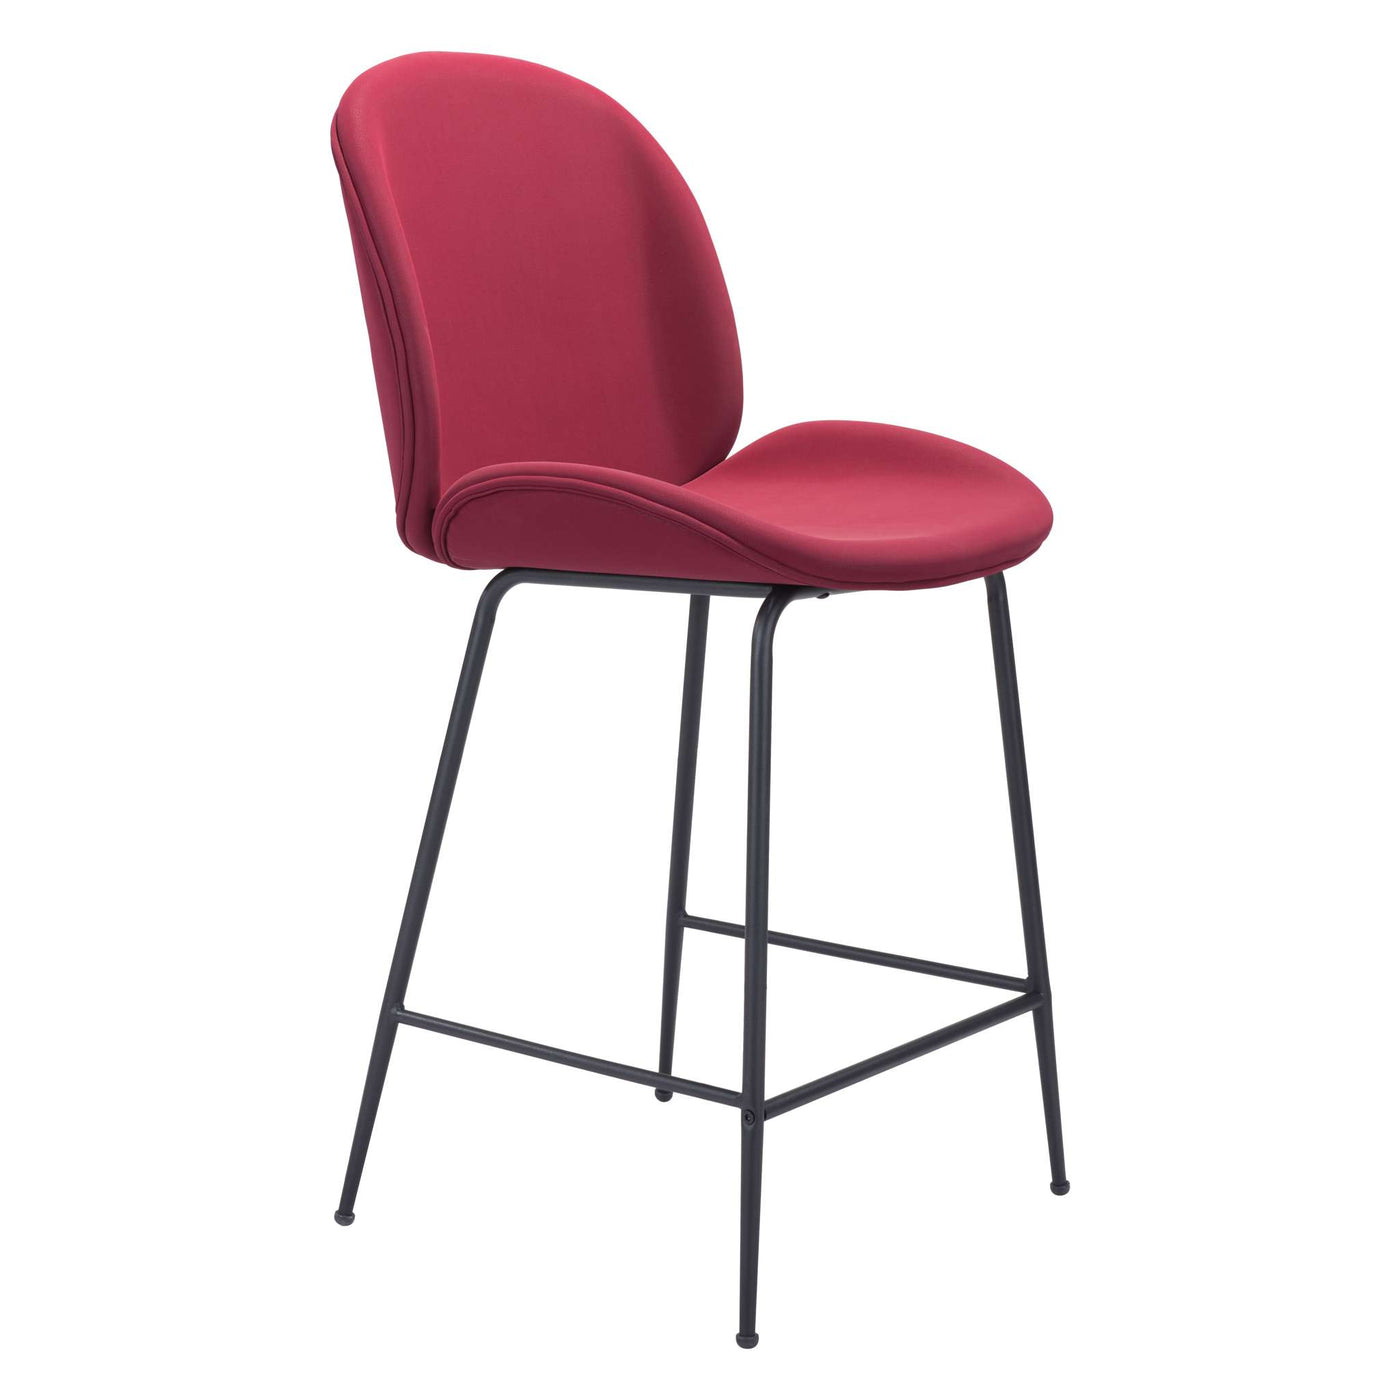 Zuo Mod Miles Counter Stool